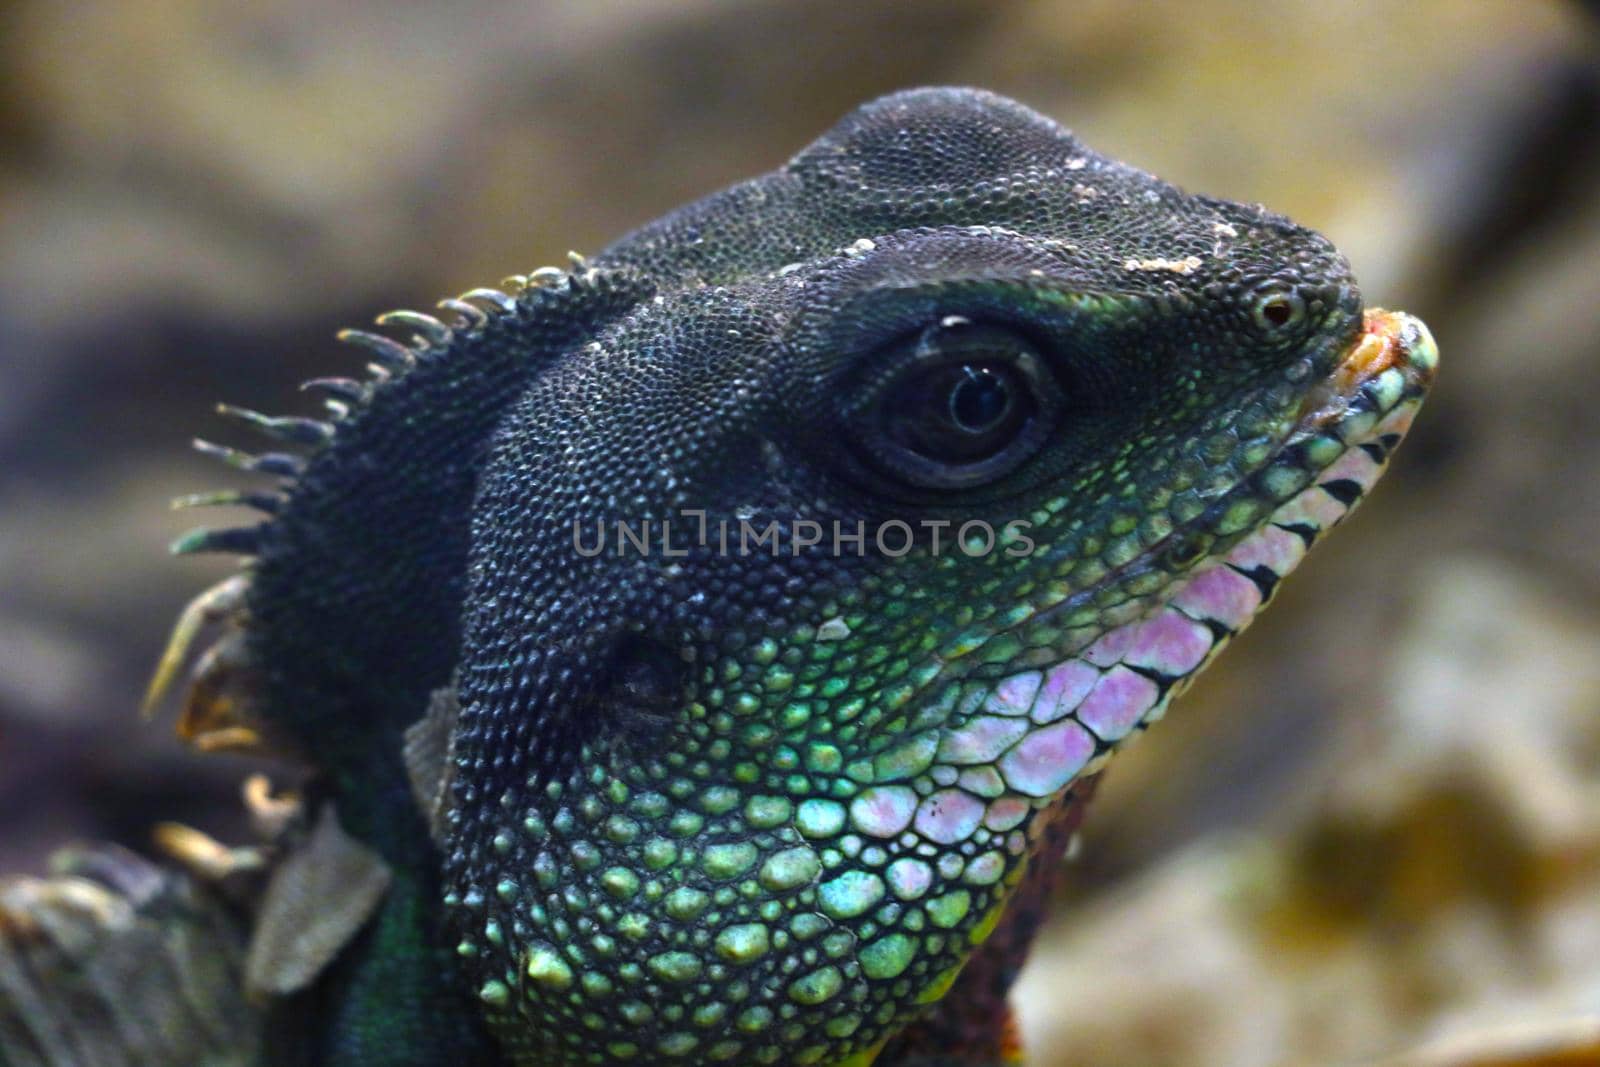 Close-up of a green lizard or homeleon